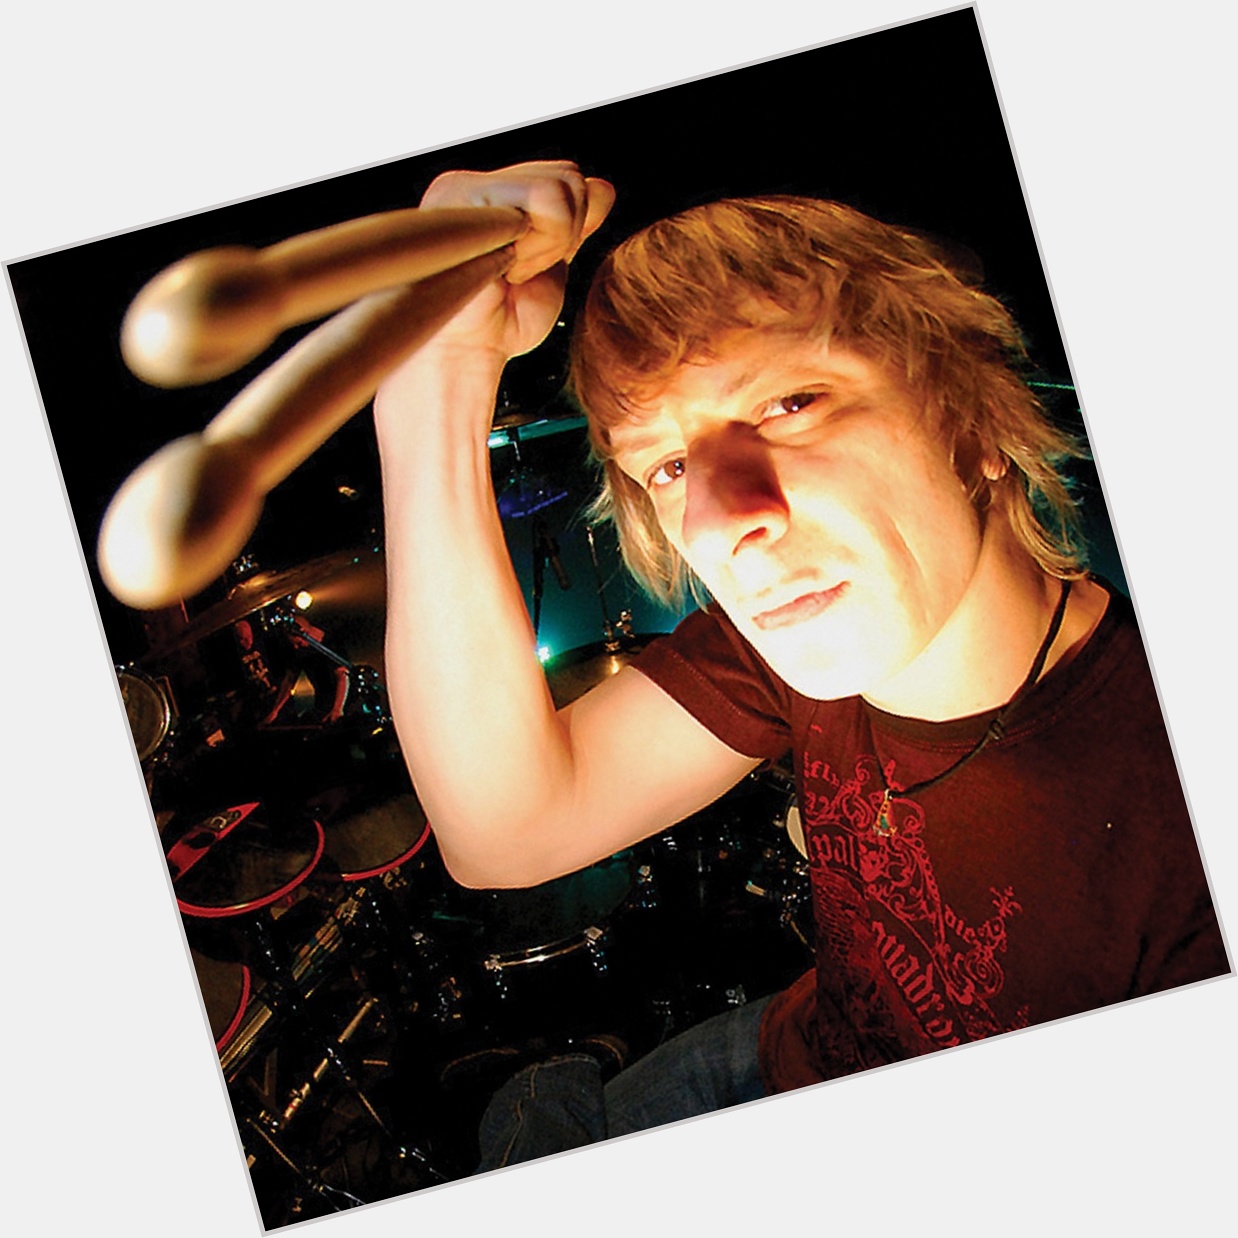 <a href="/hot-men/ray-luzier/where-dating-news-photos">Ray Luzier</a> Slim body,  blonde hair & hairstyles